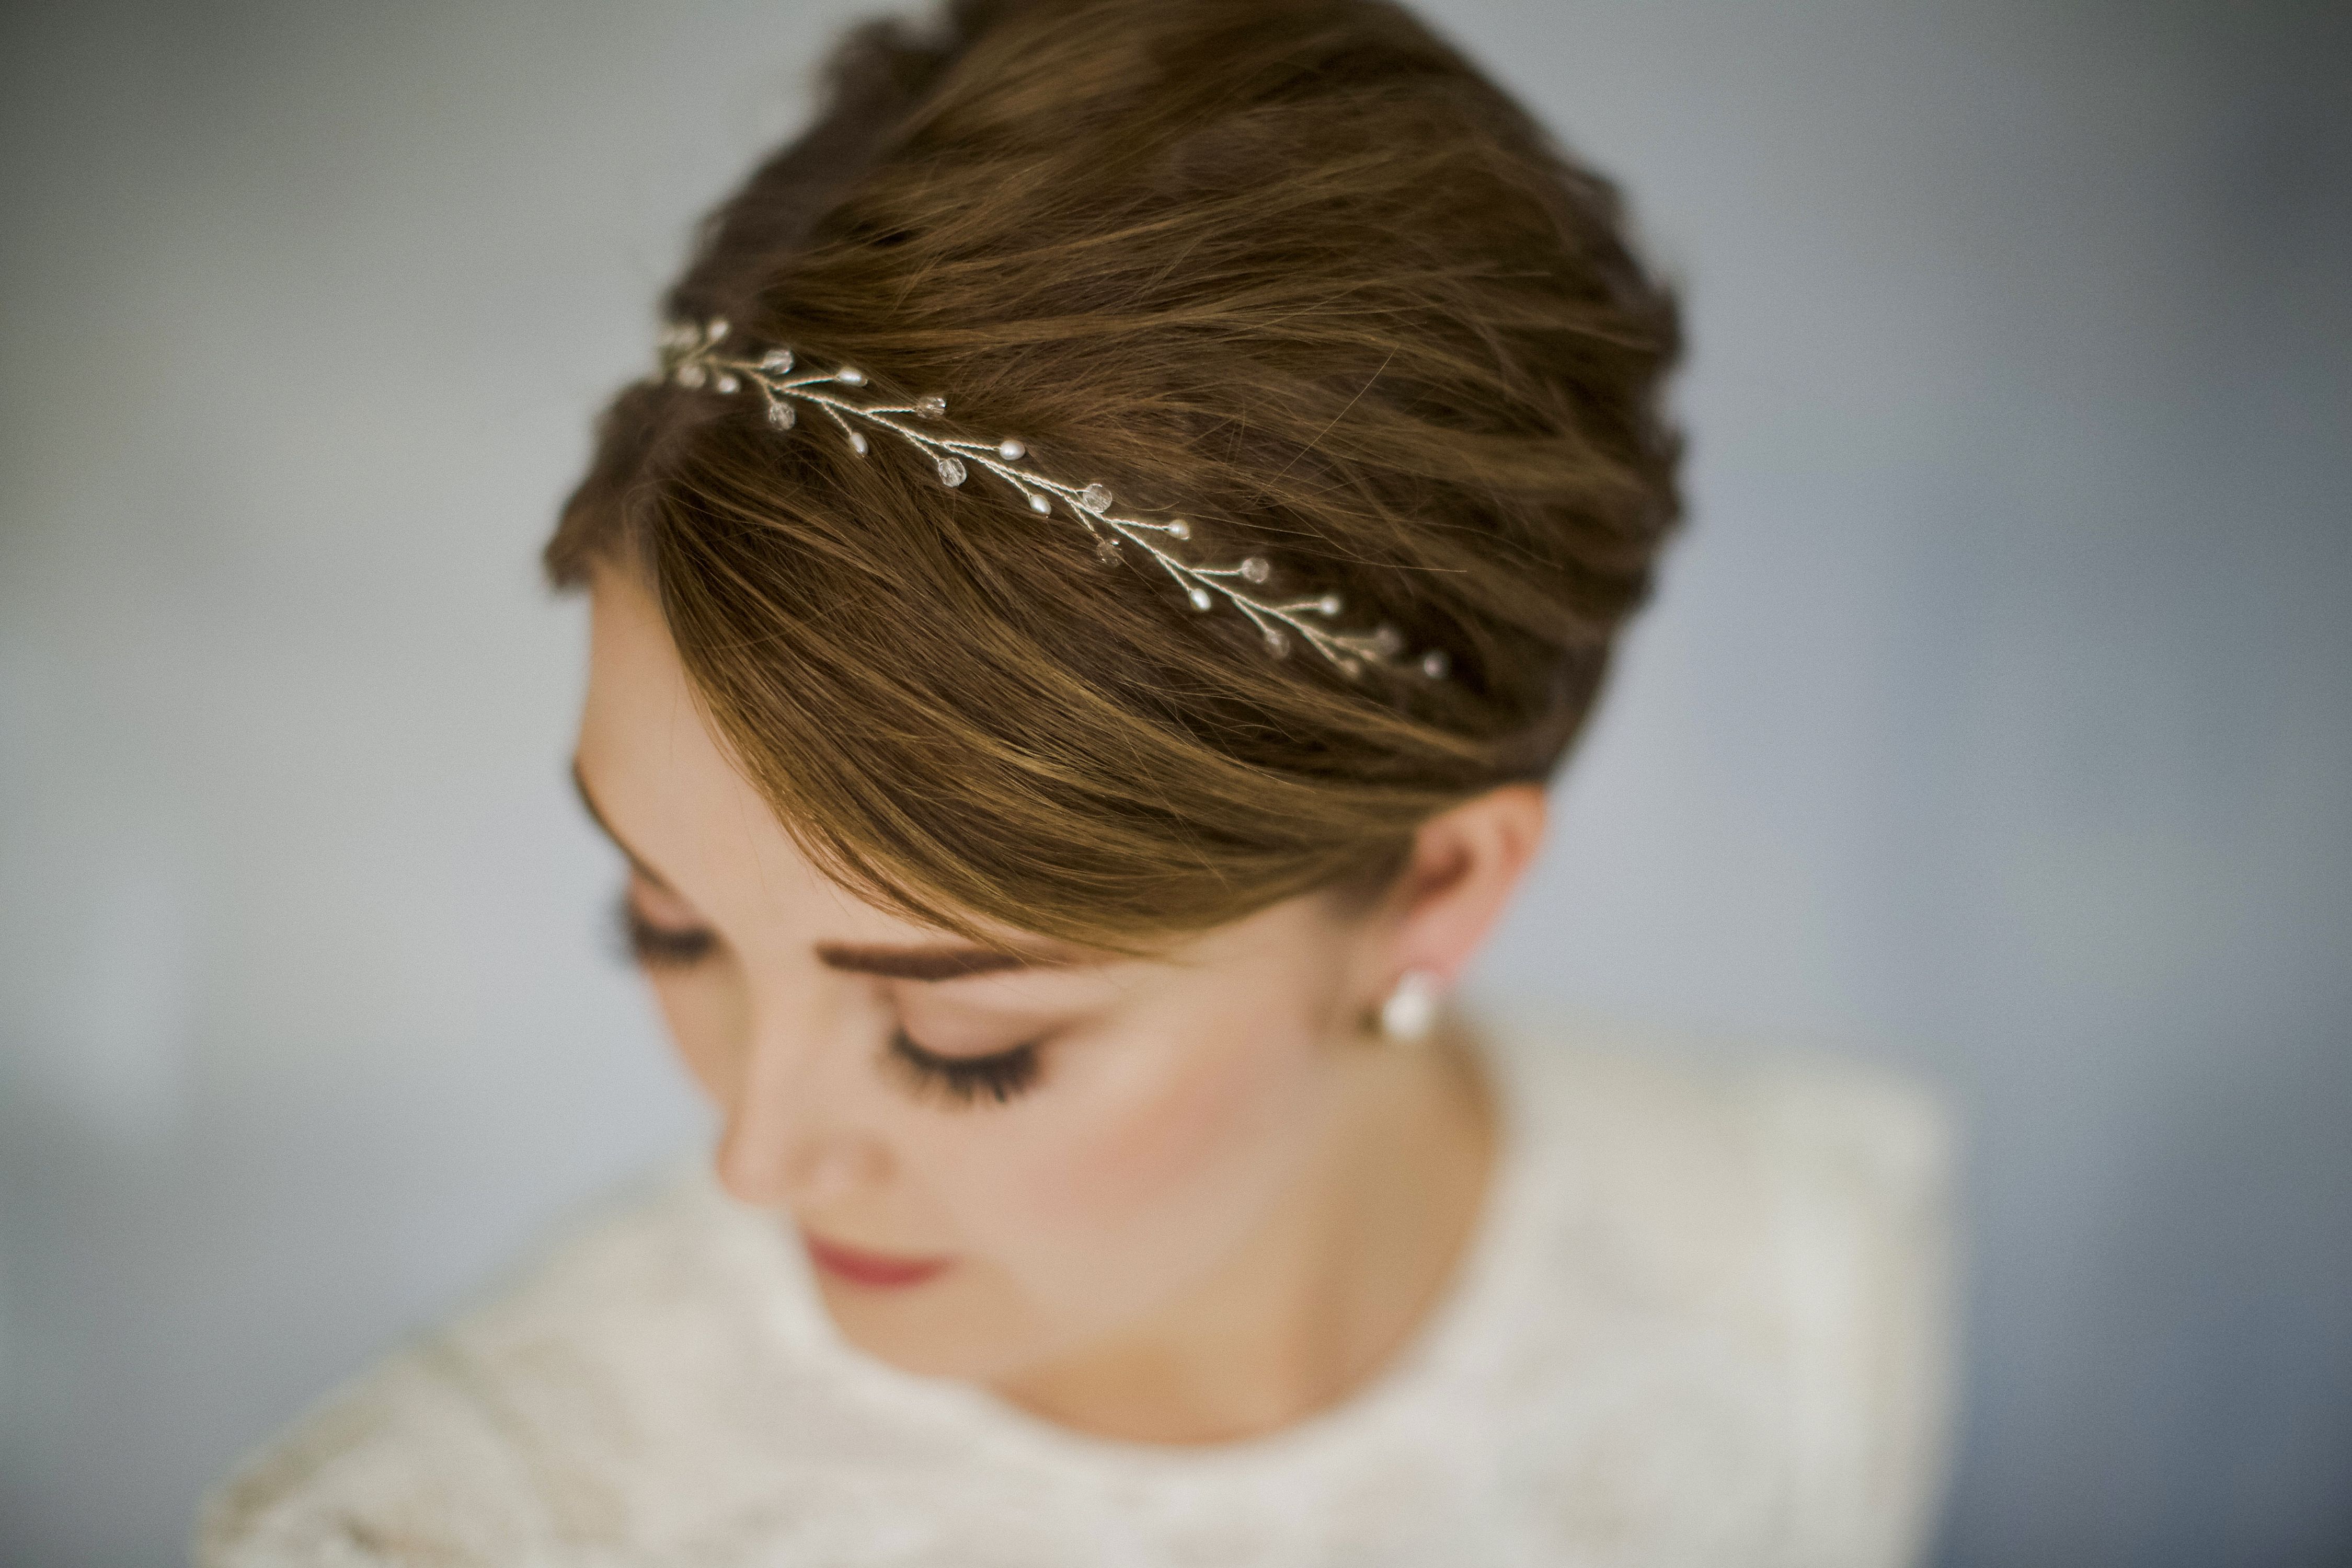 How To Style Wedding Hair Accessories With Short Hair | Love My Regarding Hairstyles For Short Hair Wedding (View 24 of 25)